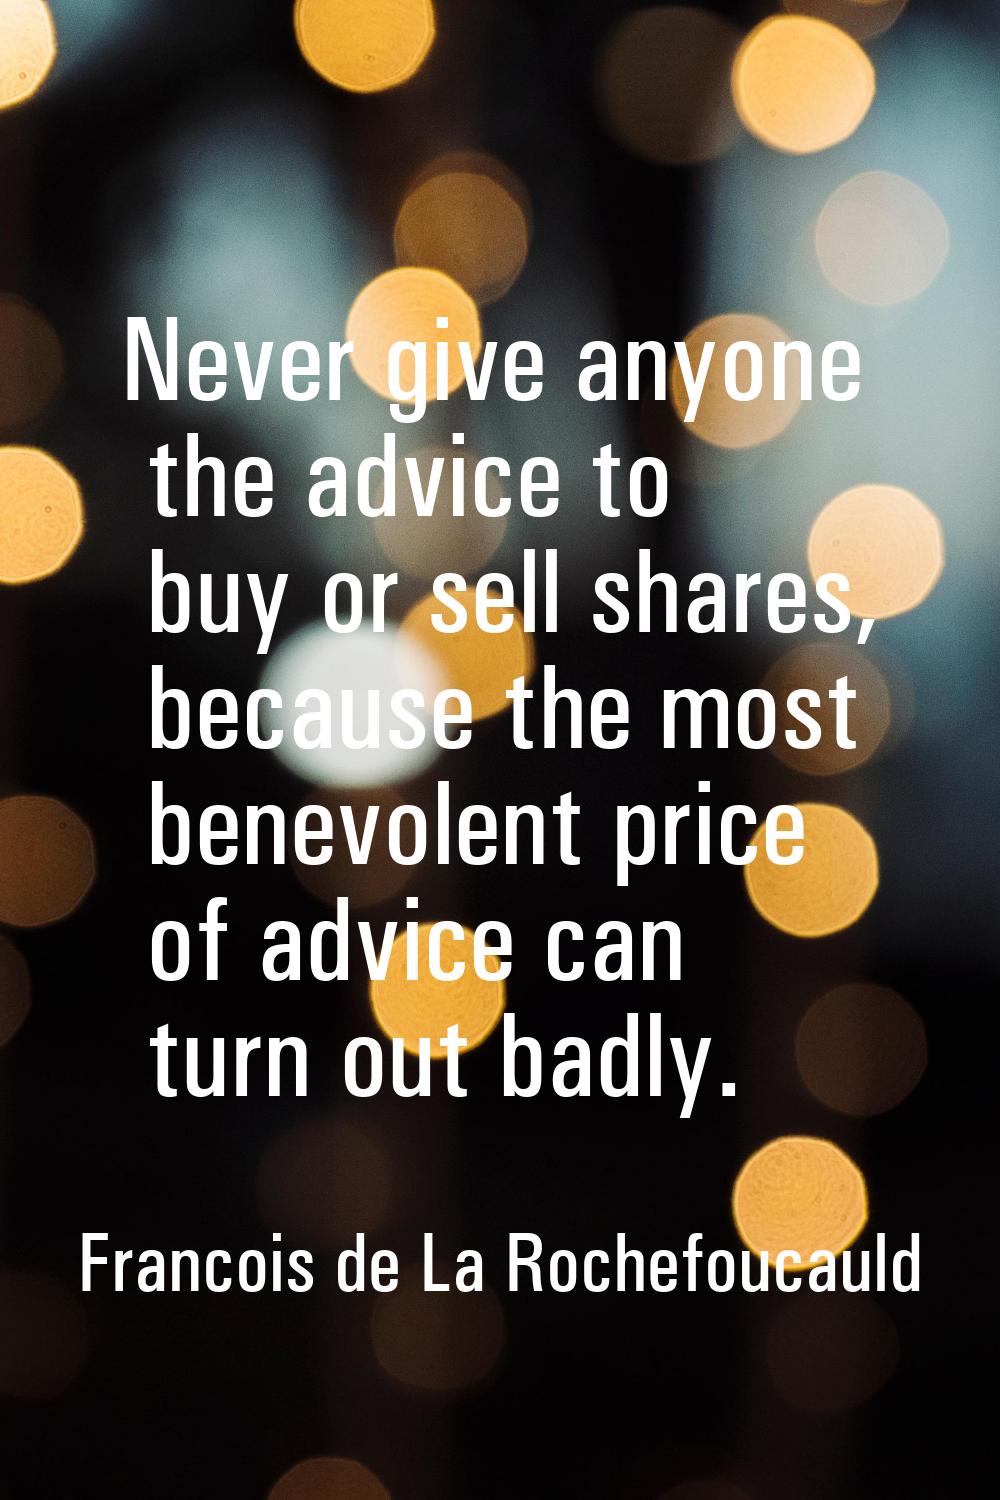 Never give anyone the advice to buy or sell shares, because the most benevolent price of advice can